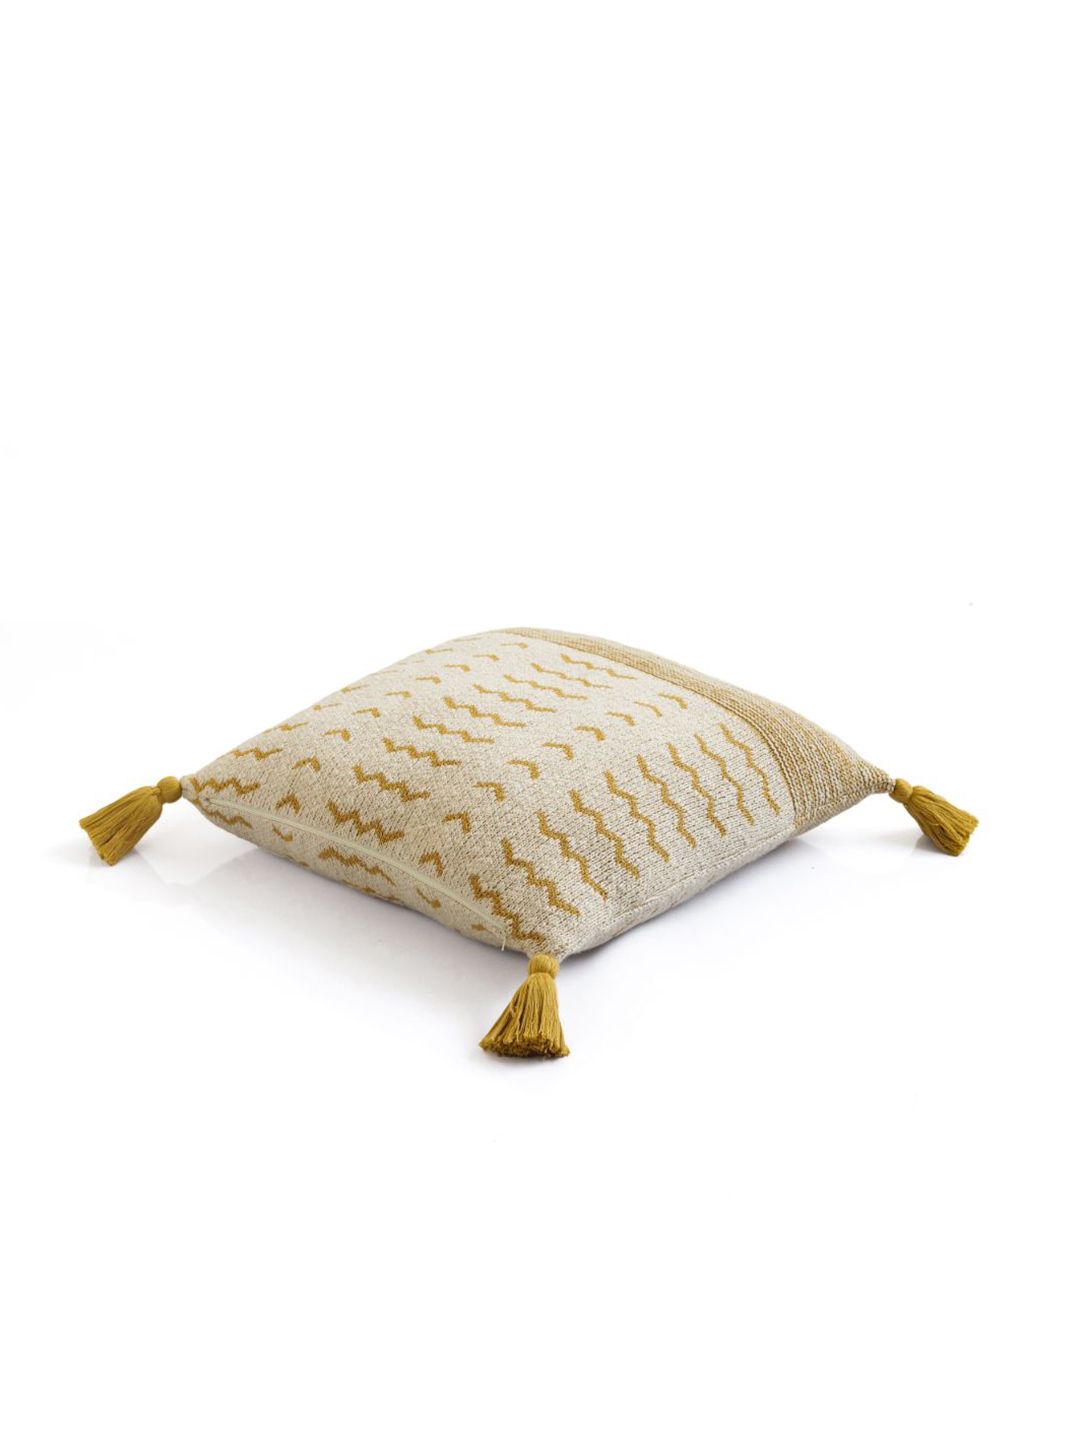 Pluchi Yellow & Cream-Coloured Pure Cotton Knitted Cushion Cover with Tassels Price in India